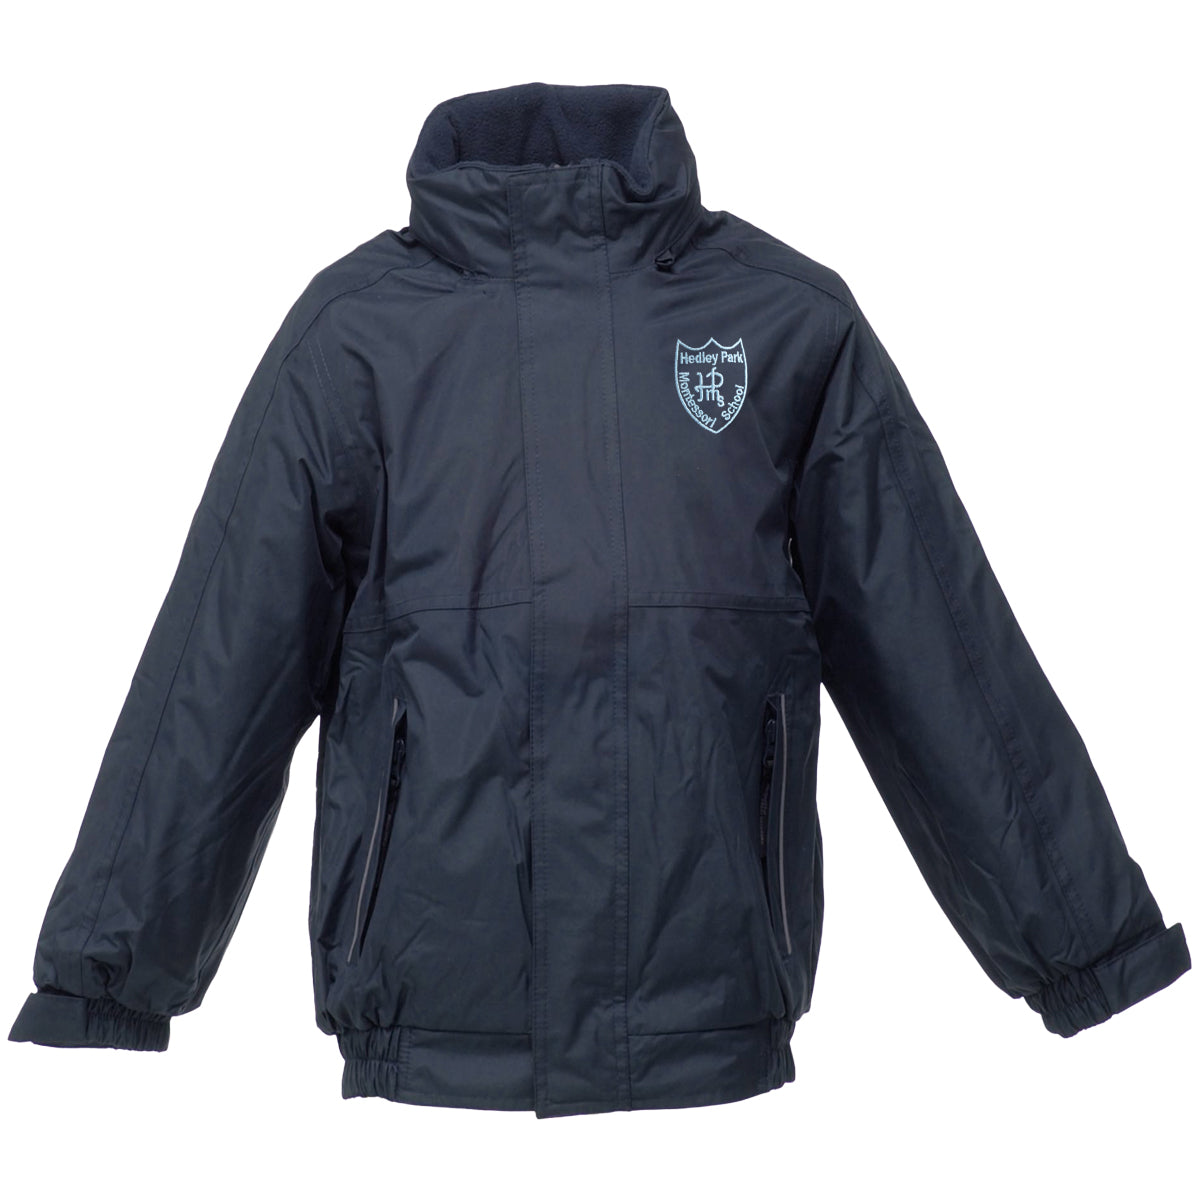 A photo of the Hedley Park Jacket in Navy with embroidered School Crest on left chest.